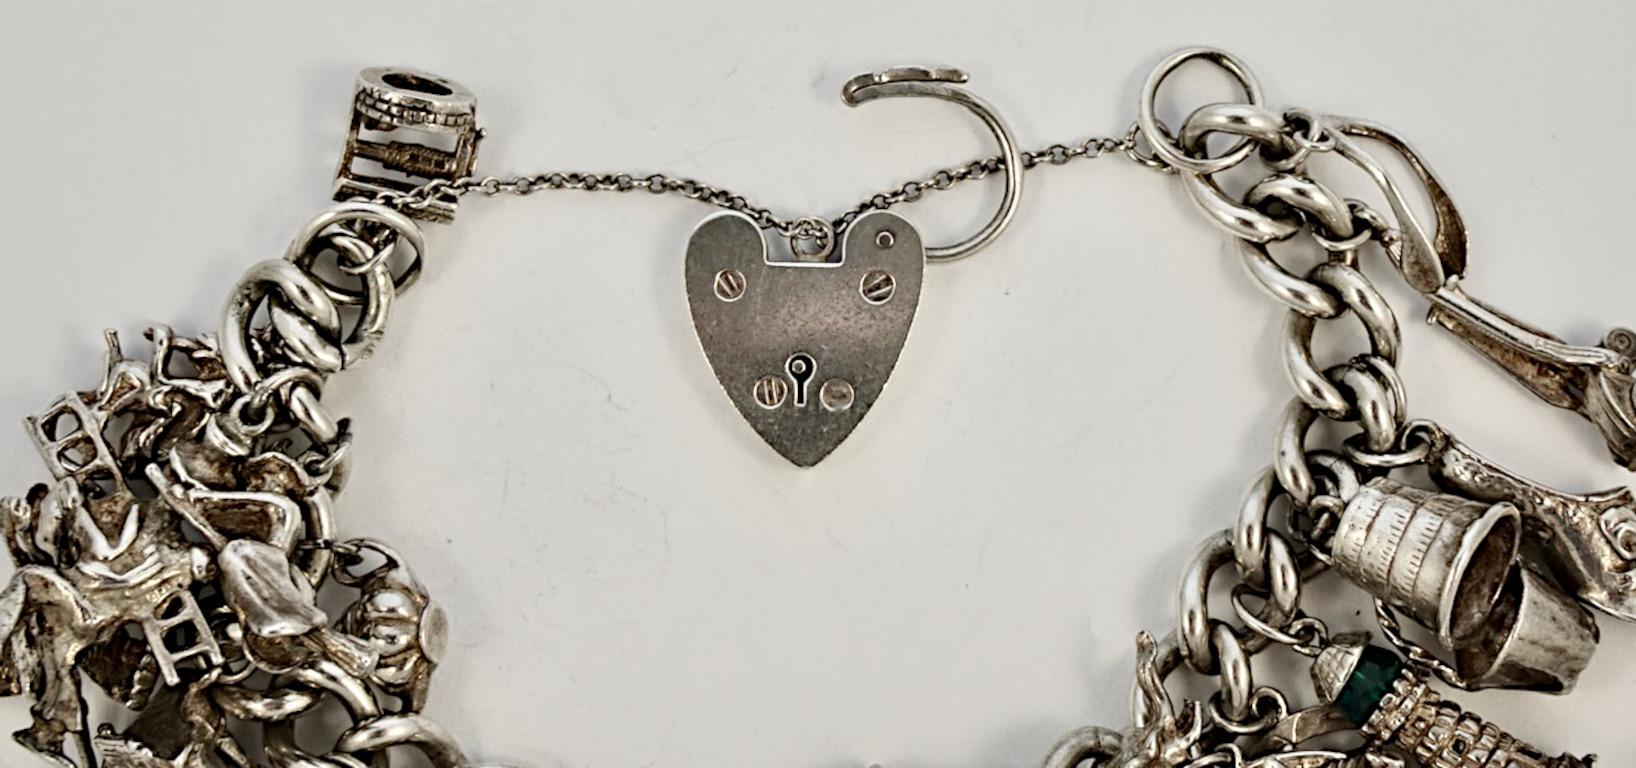 Delightful English sterling silver charm bracelet with a heart lock and chain.

There are twenty seven charms: wishbone, hoover, thimble, shoe, champagne in an ice bucket, lighthouse, horse and horseshoe, eros, cat with ball, elephant, cat with